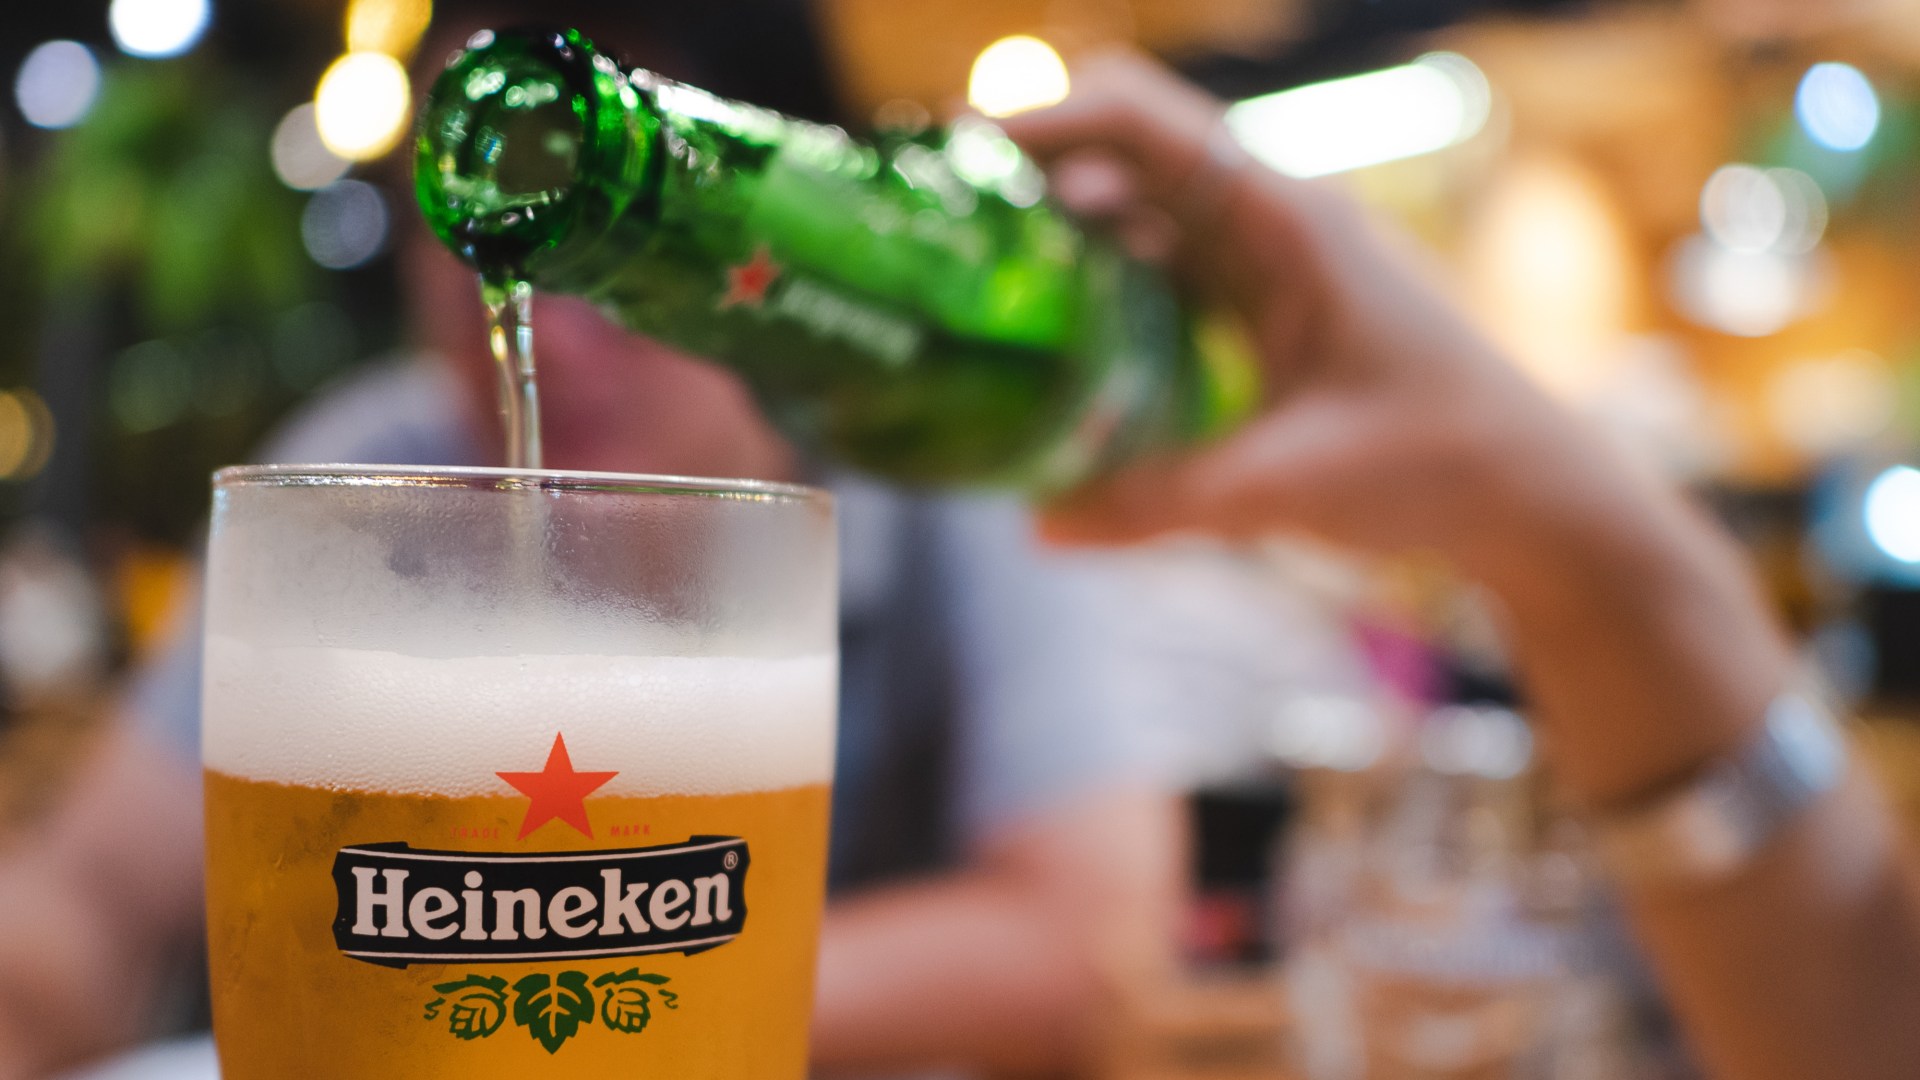 Heineken to reopen 62 popular British pubs with 39million investment injection – list of first 10 locations revealed [Video]